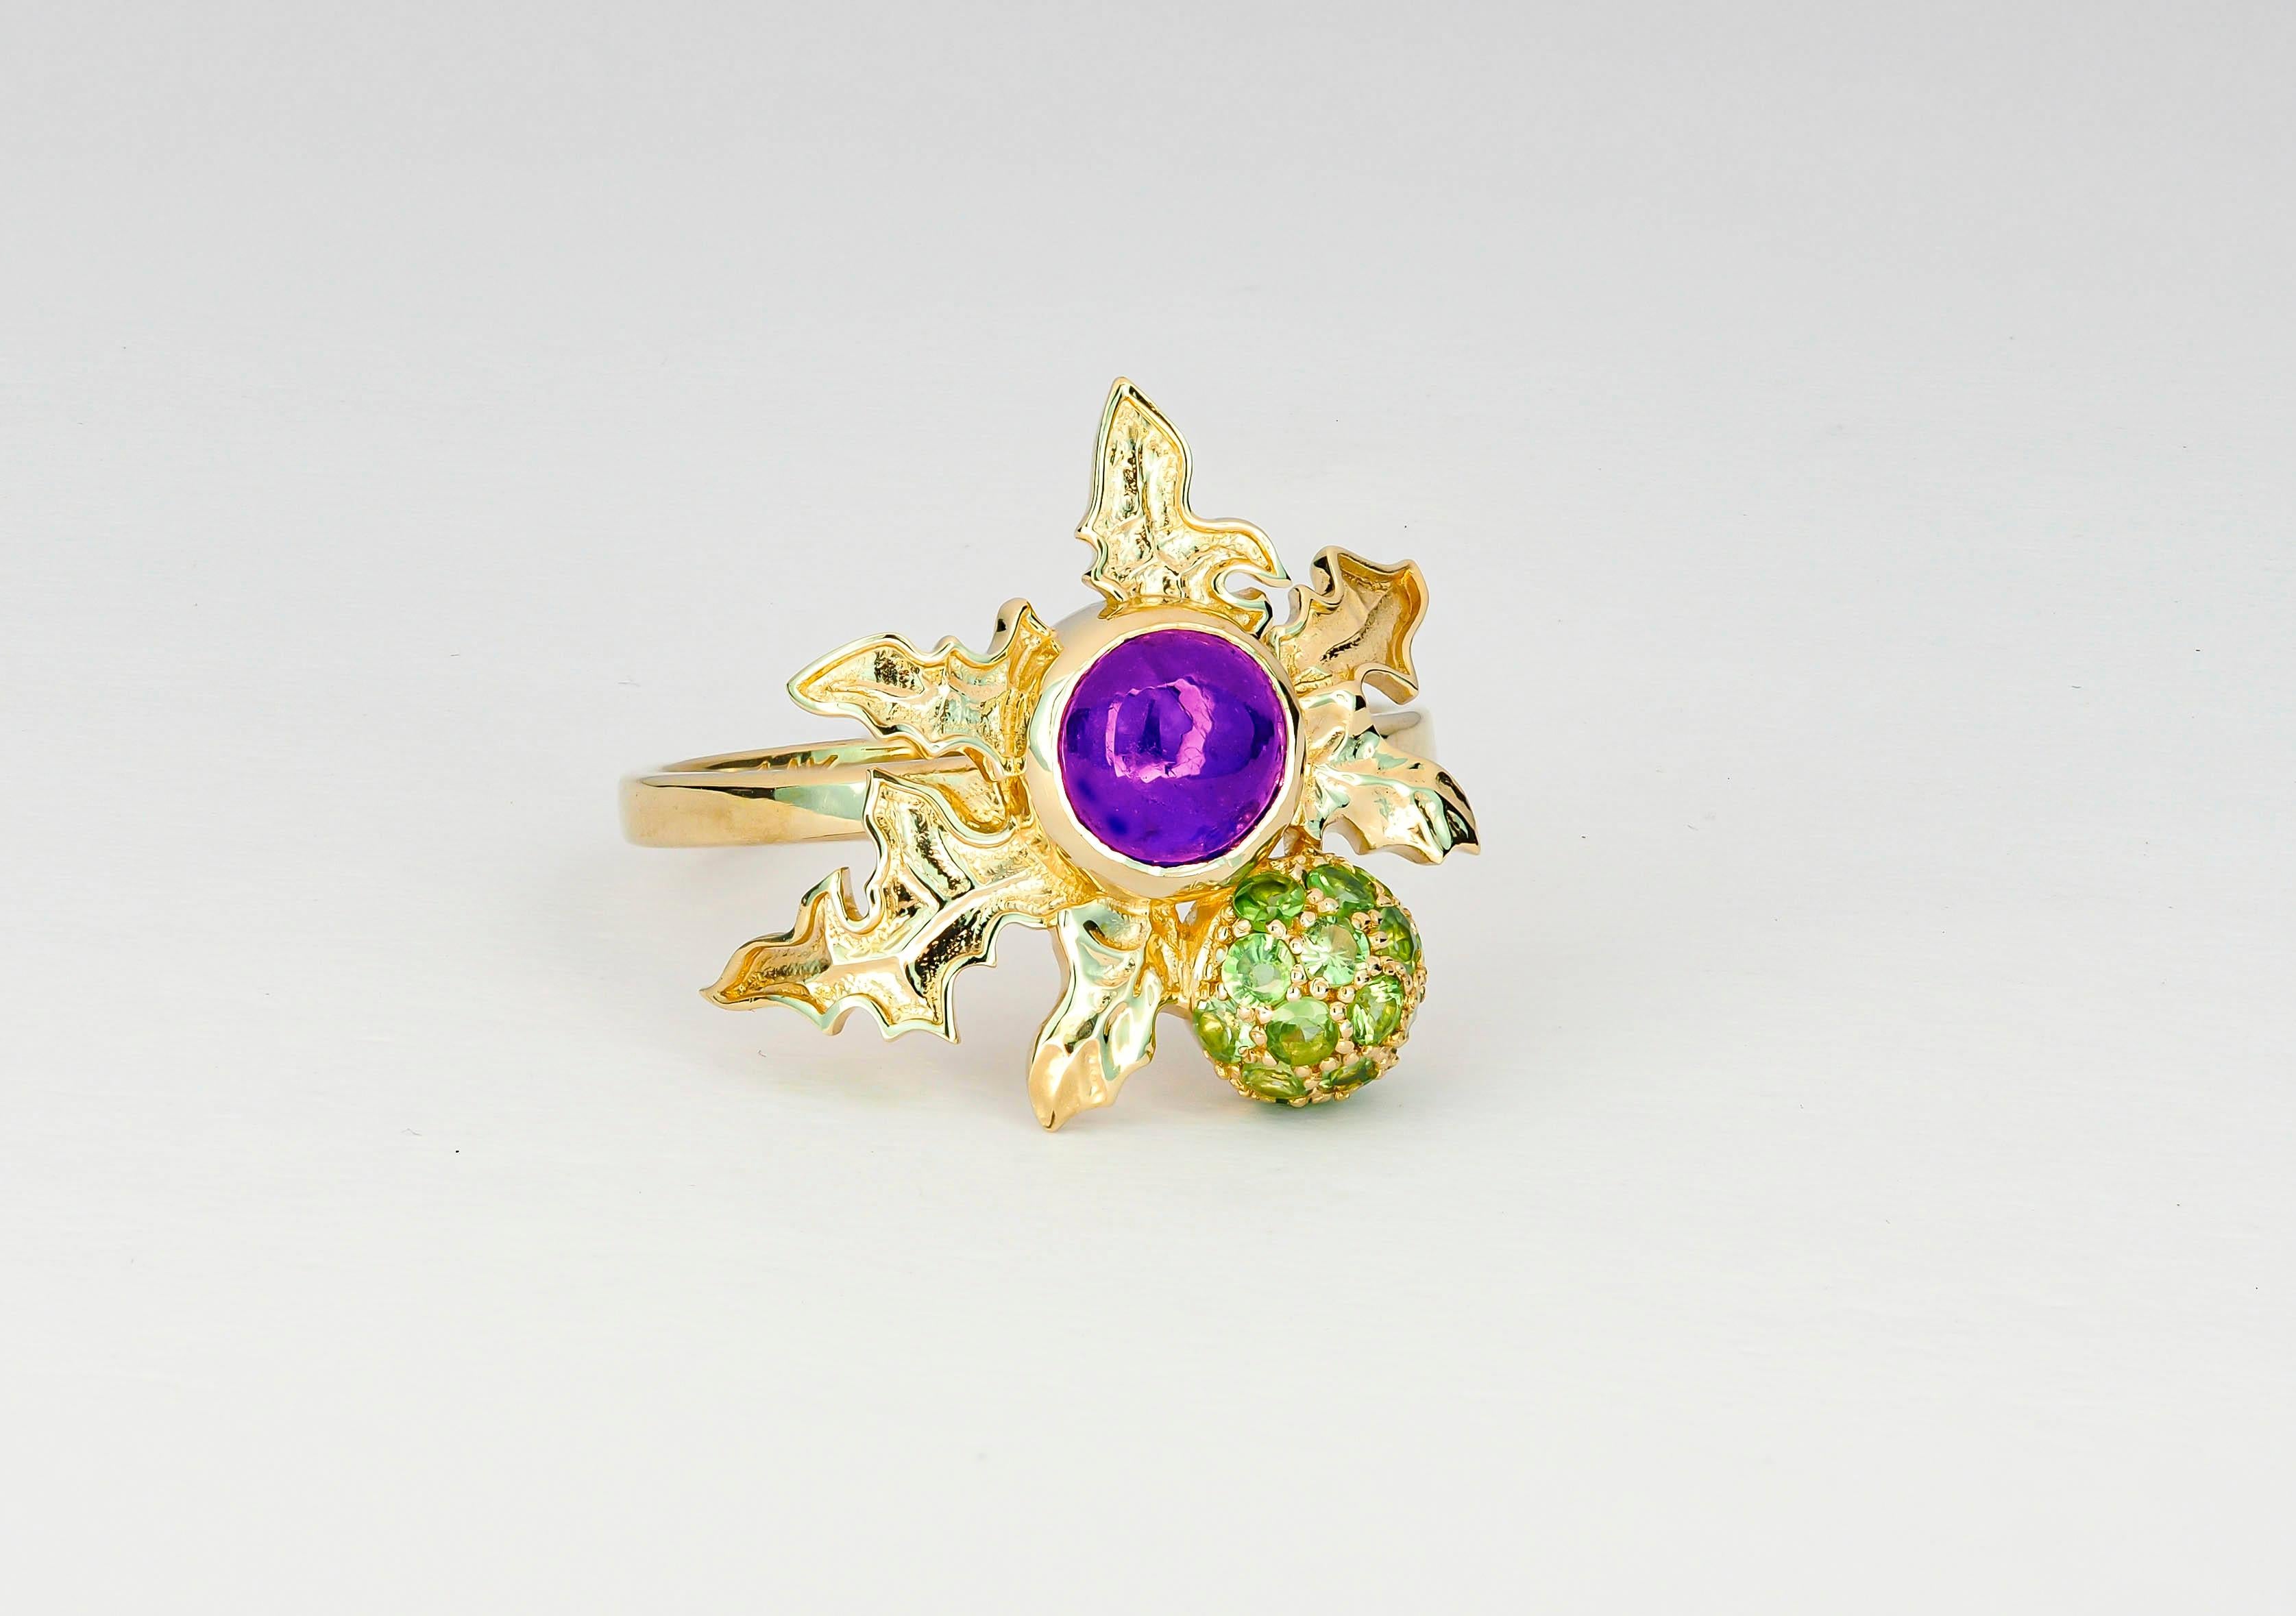 14 K Gold Scottish Thistle Ring with Amethyst and Peridots 1